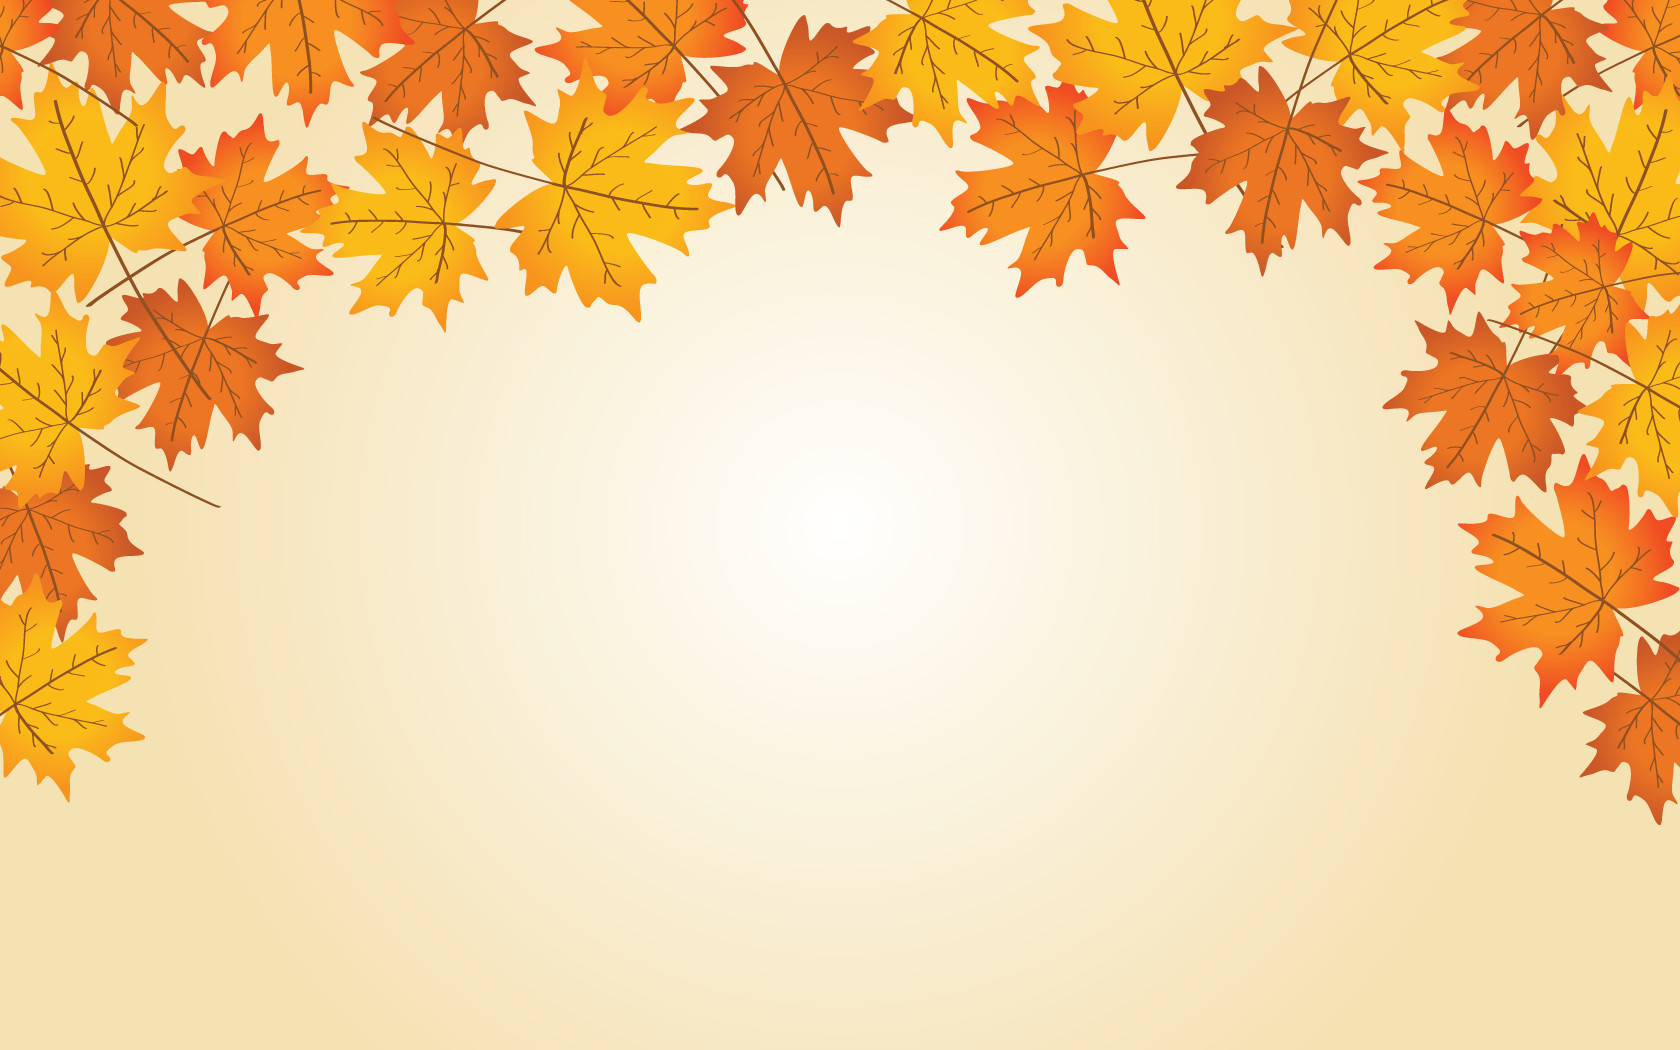 Autumn Vector Background For Website 3792 HD Backgrounds